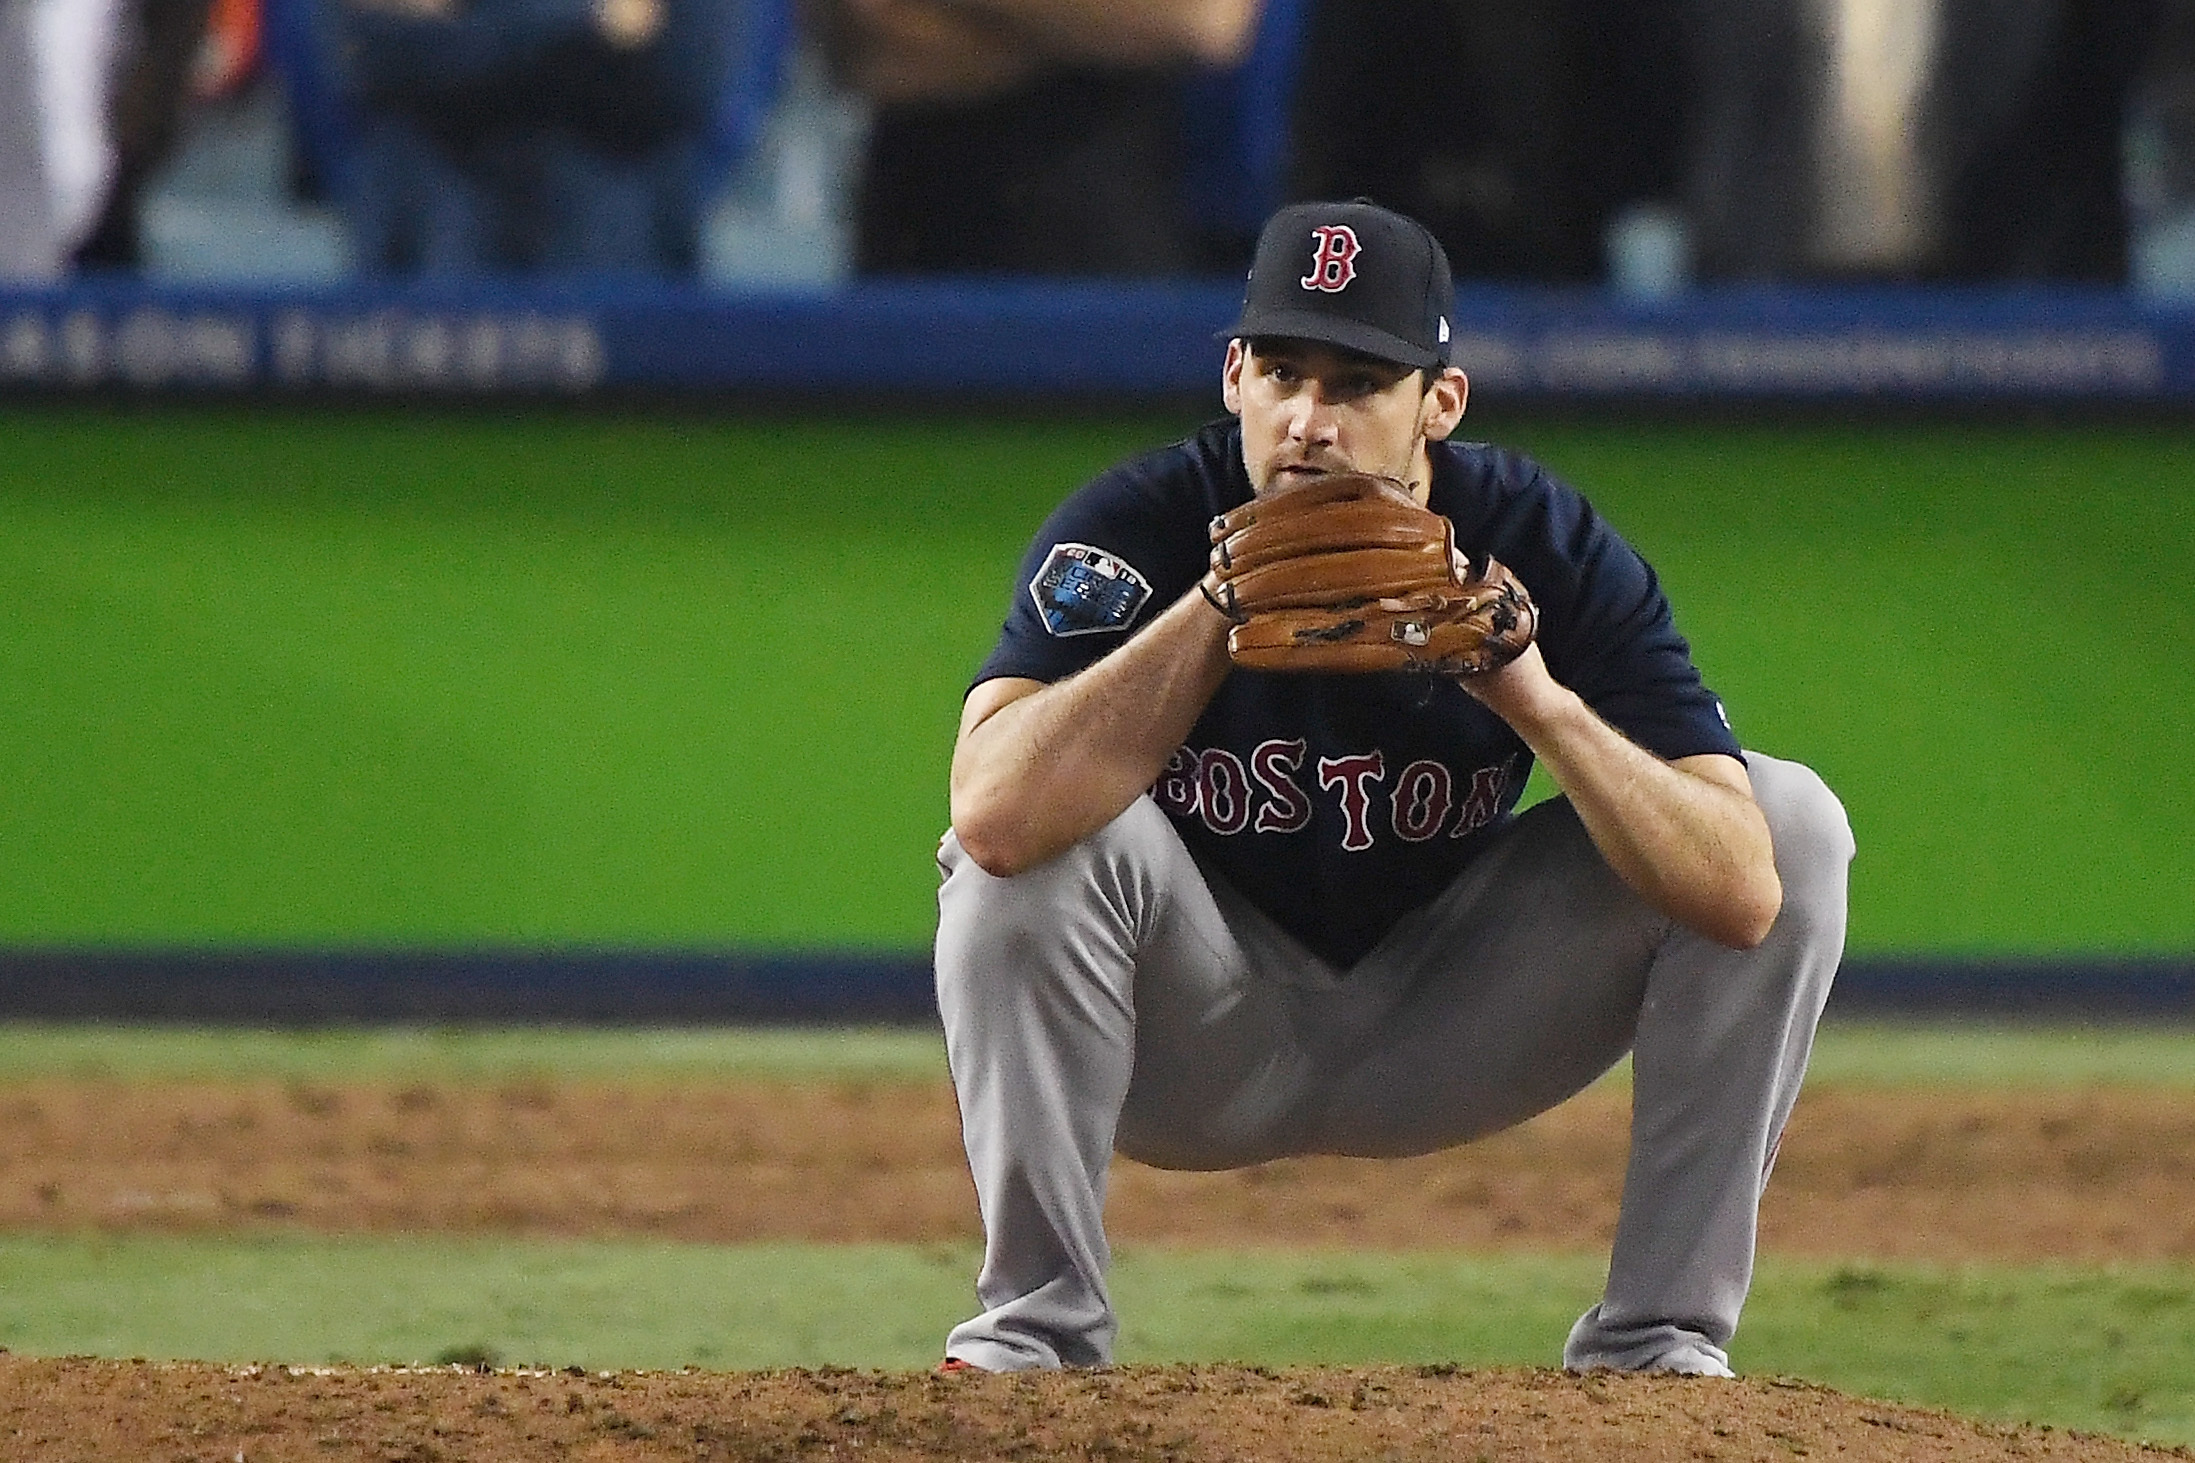 Nathan Eovaldi's Game 3 World Series performance: The stuff of legends